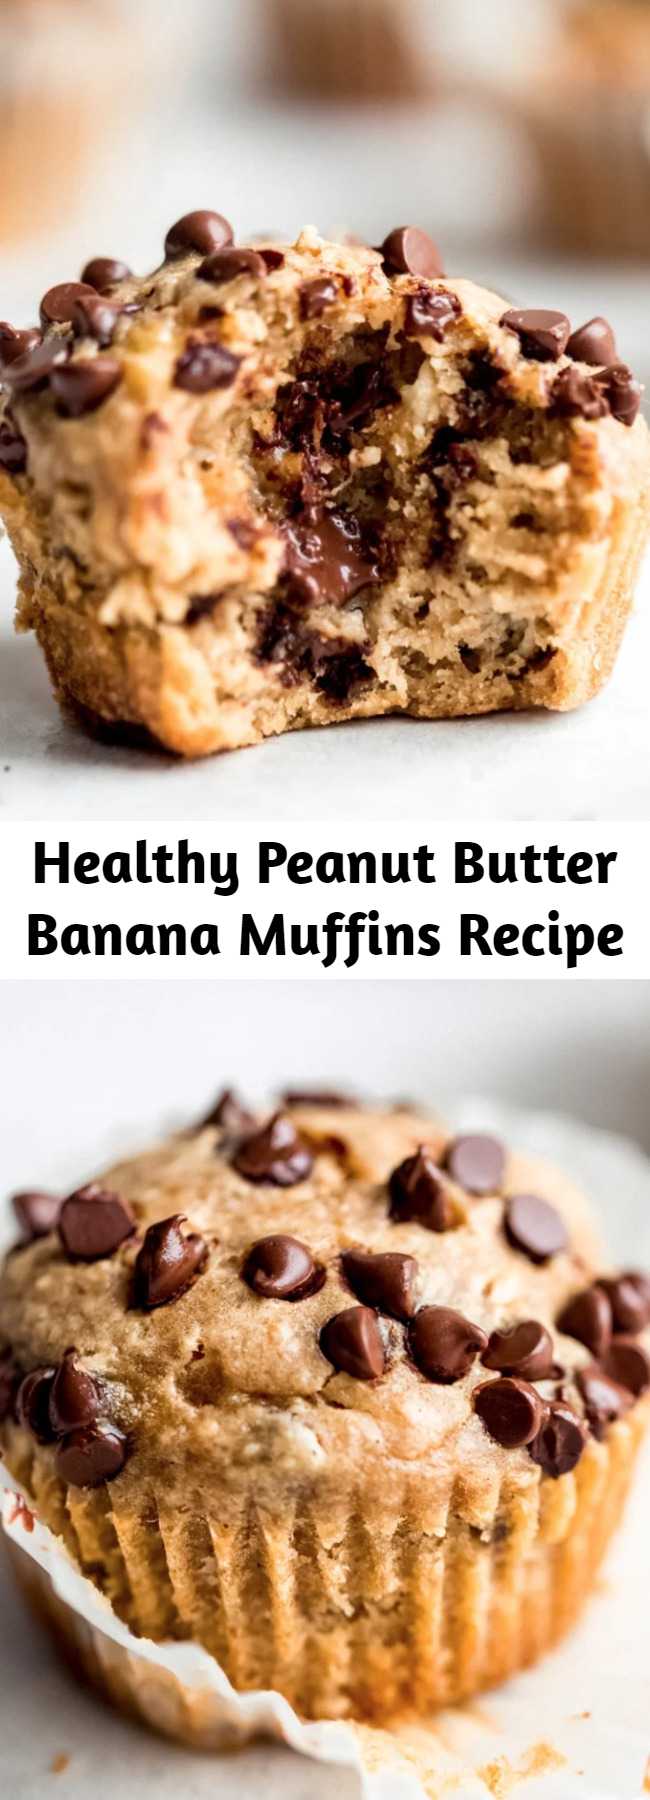 Healthy Peanut Butter Banana Muffins Recipe - The BEST peanut butter banana muffins that are packed with protein and peanut butter flavor. Naturally sweetened with pure maple syrup, gluten free thanks to oat flour and a great on-the-go healthy breakfast or snack. Try them with mini chocolate chips! #glutenfree #glutenfreesnack #dairyfree #kidfriendly #kidfood #muffins #muffinrecipe #peanutbutter #healthysnack